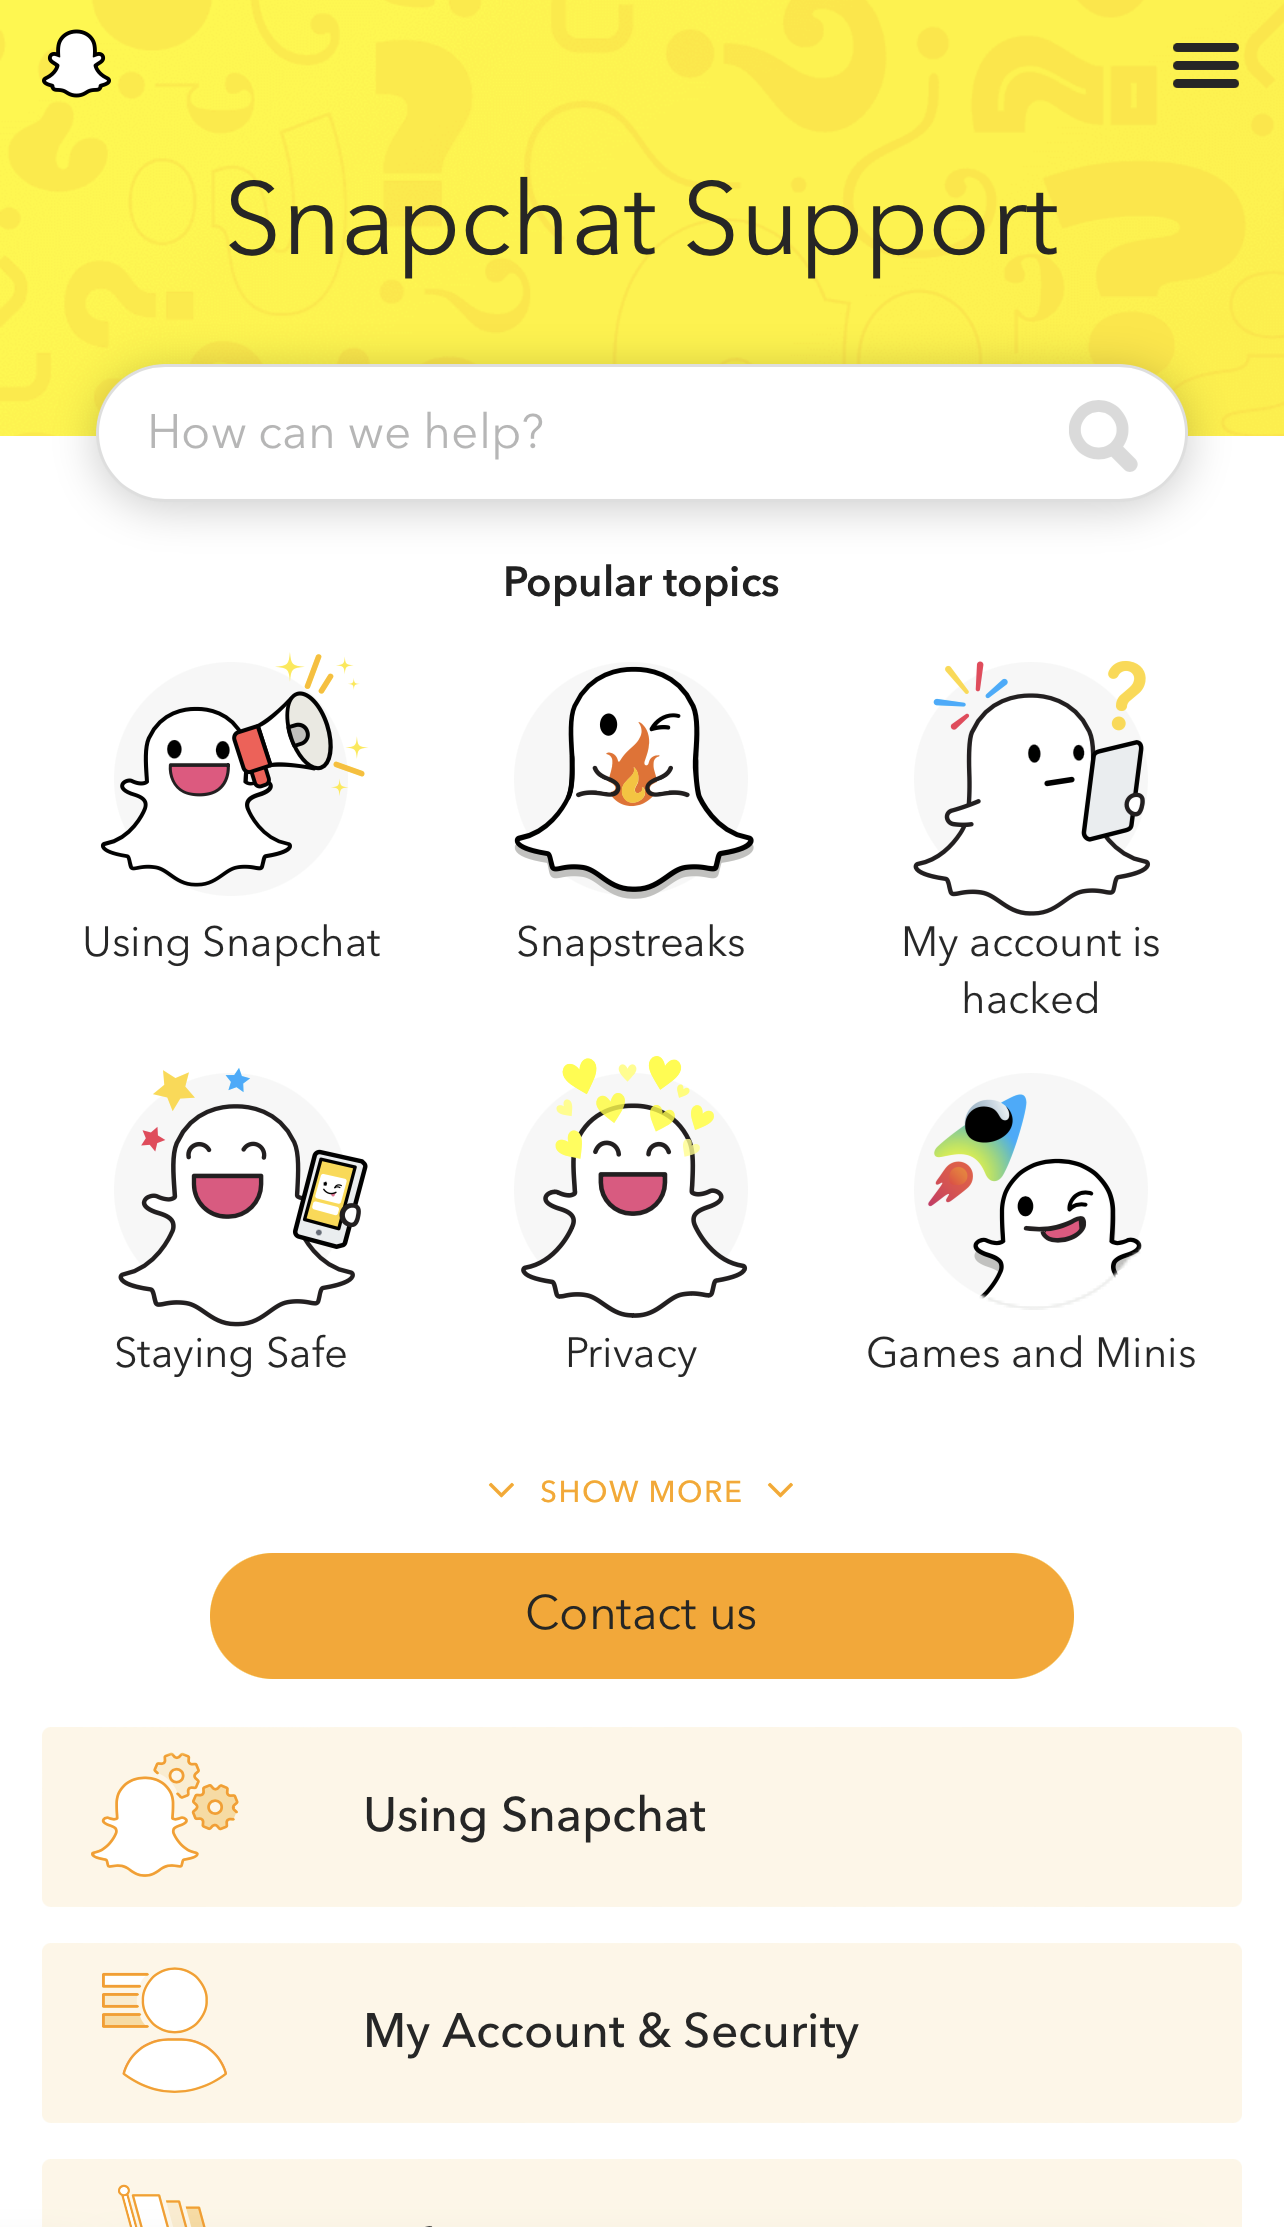 Snapchat help page